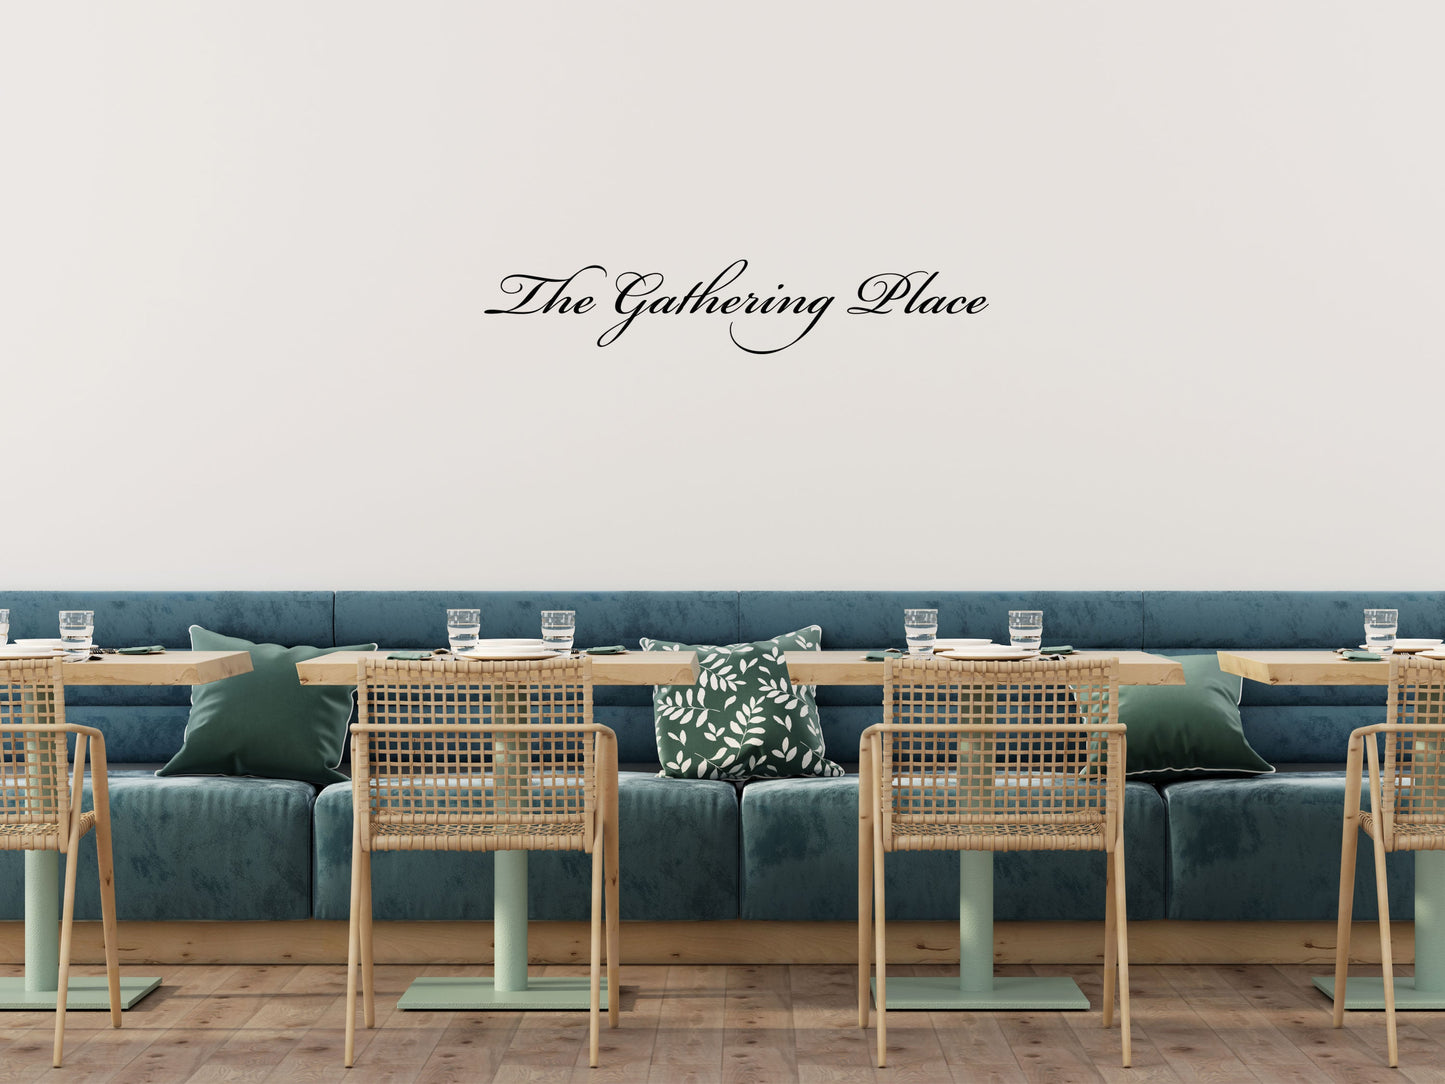 The Gathering Place - Inspirational Wall Signs Vinyl Wall Decal Inspirational Wall Signs 